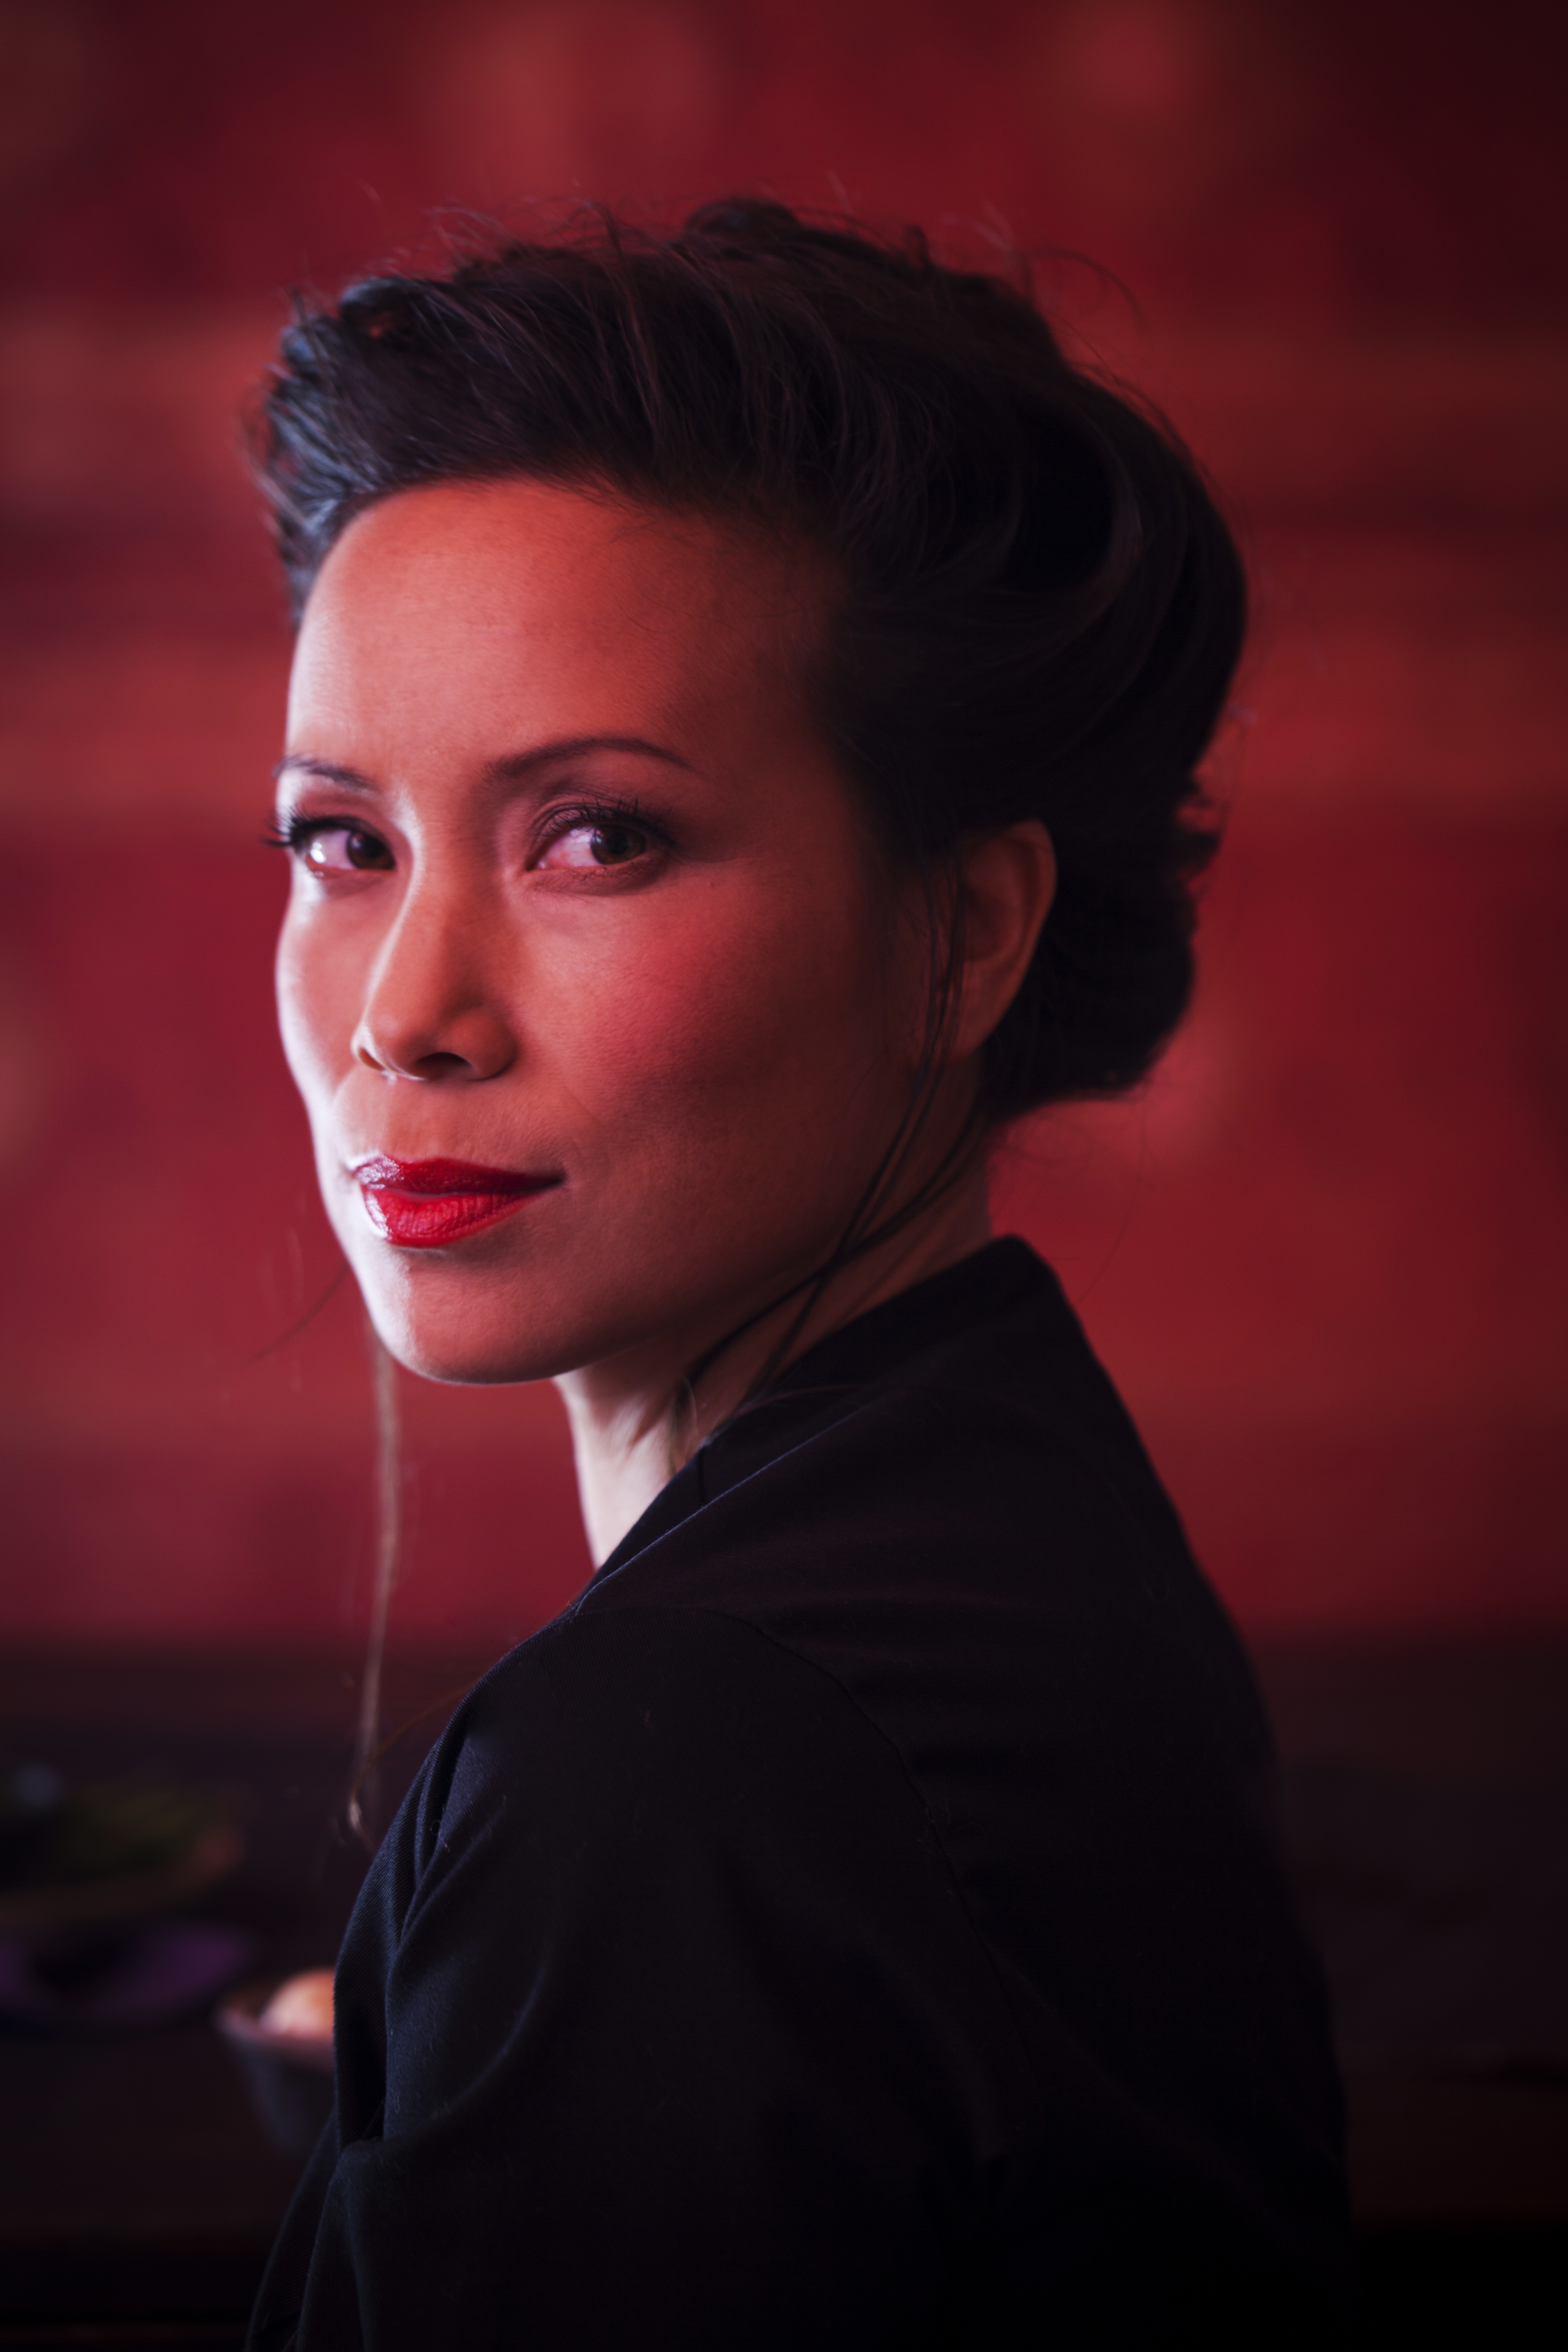 Homage to ¨In the Mood for Love¨